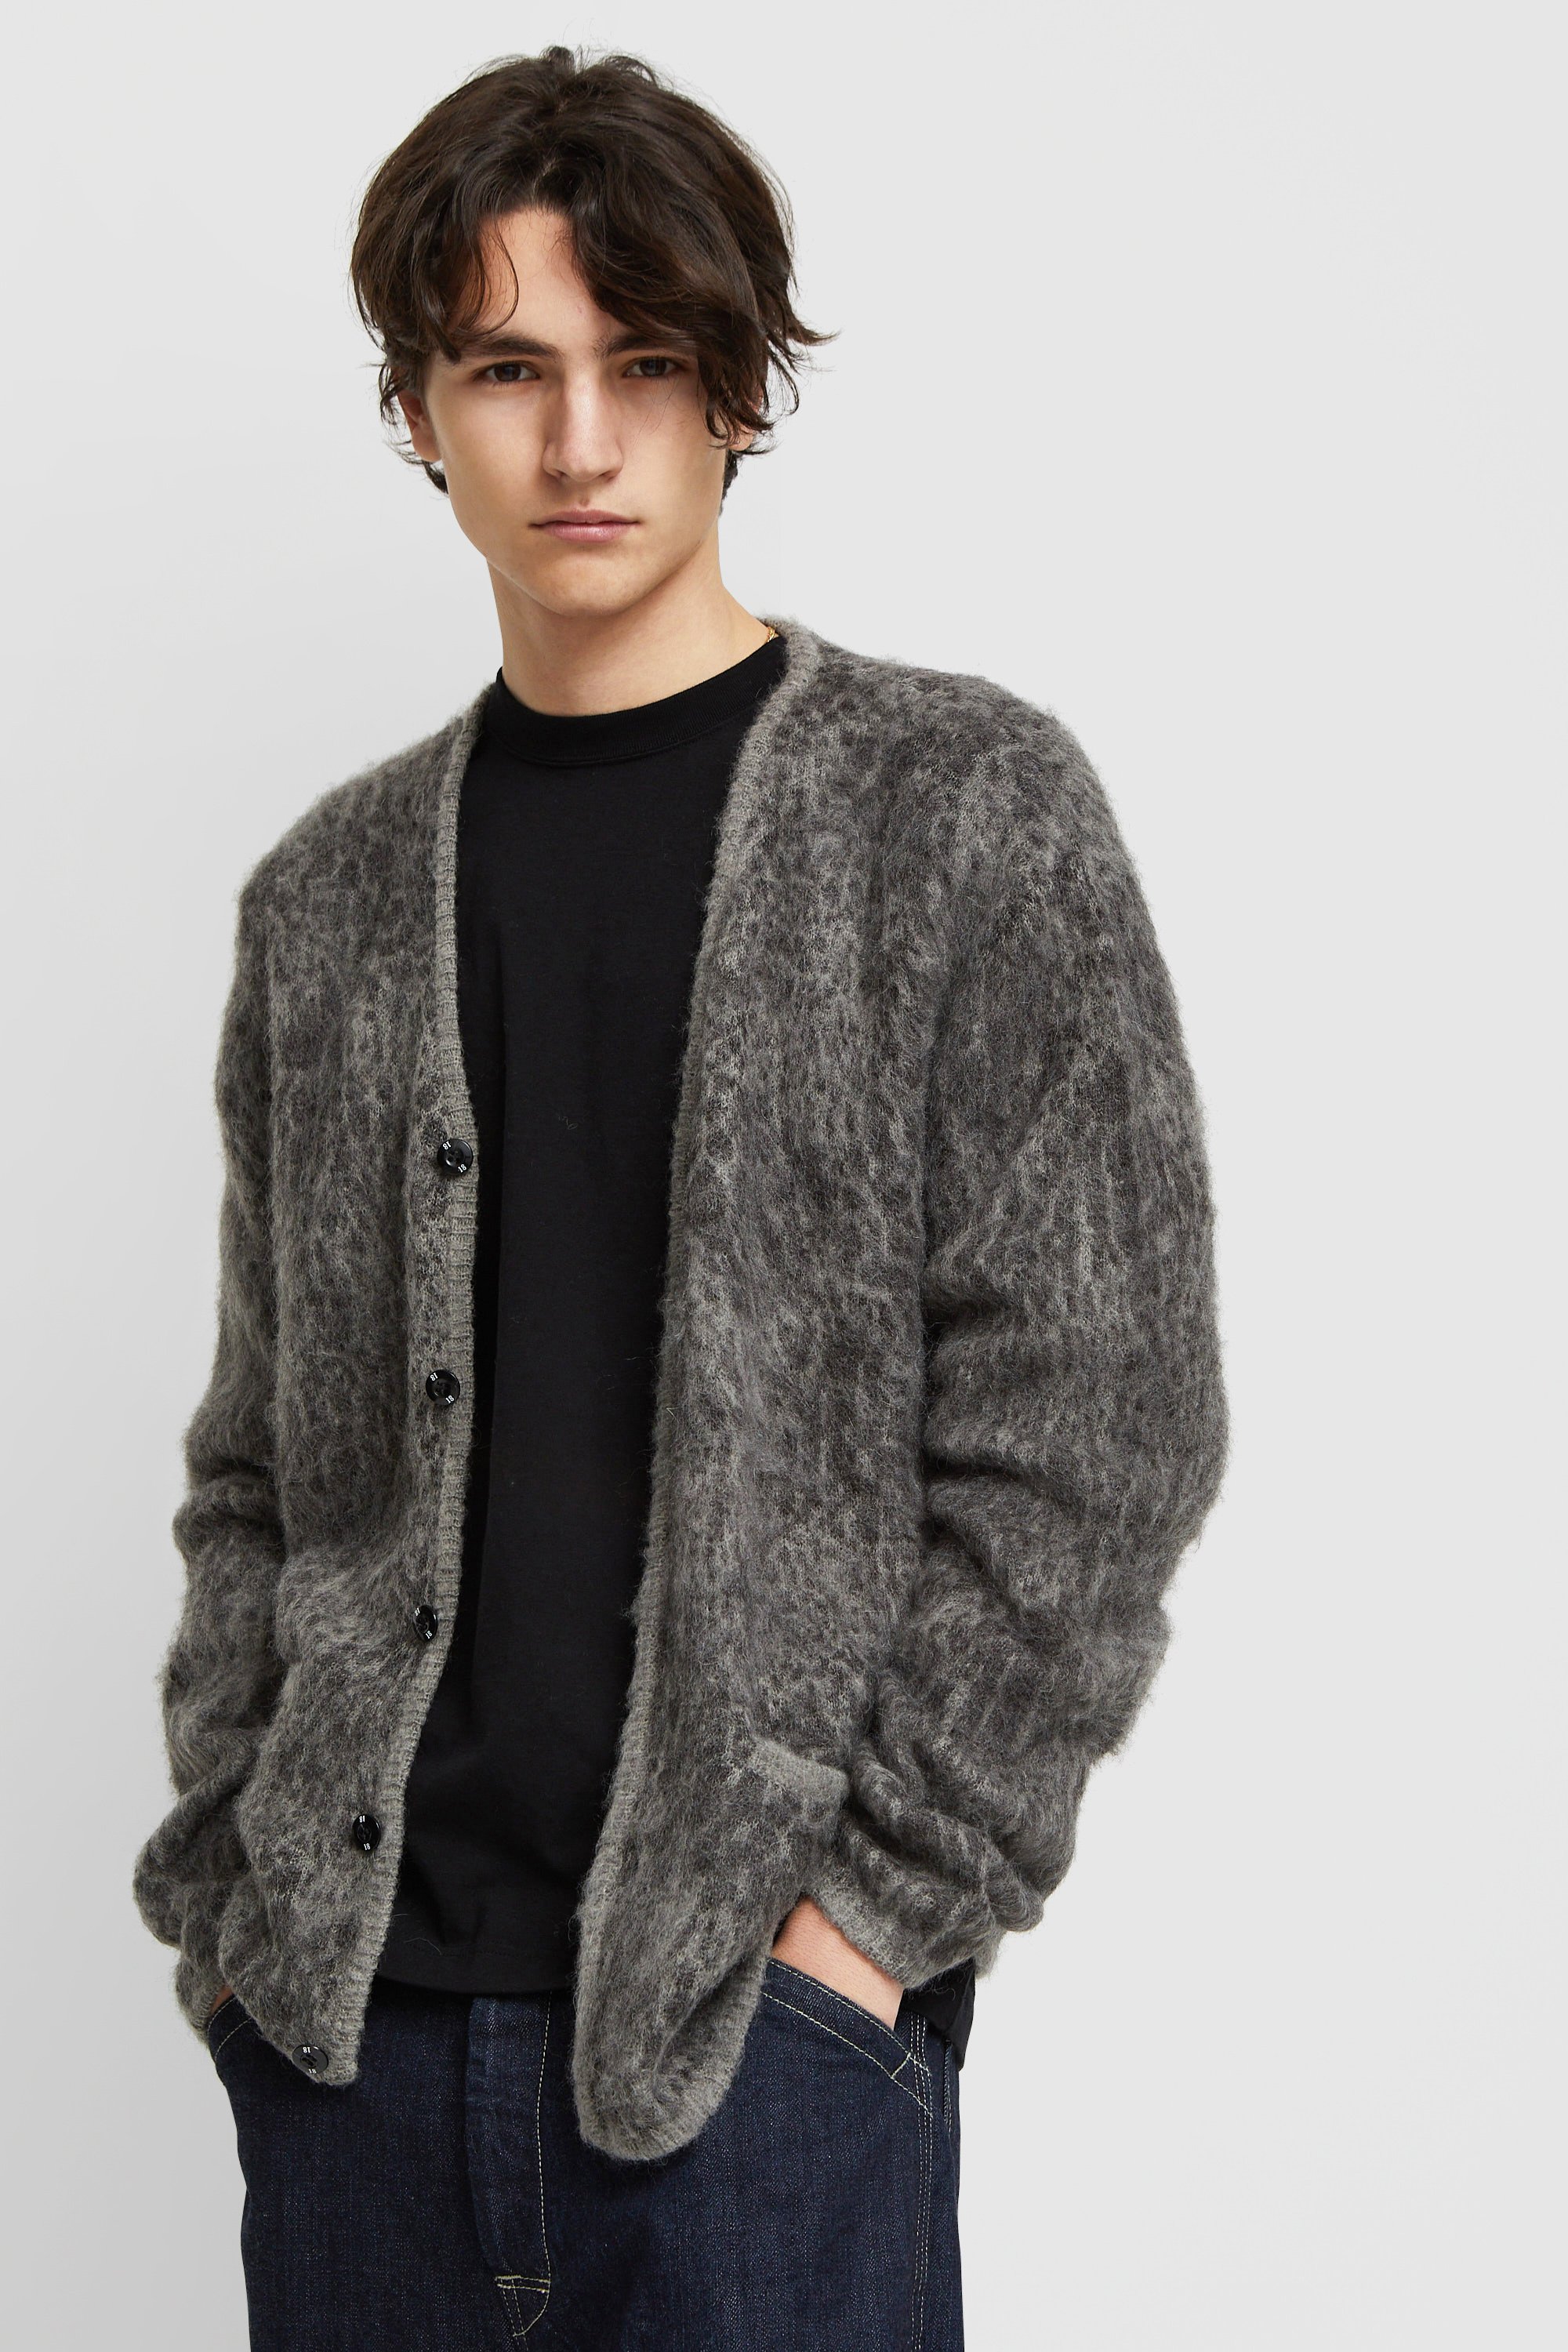 Mohair Cardigan / NA-Knit . LS